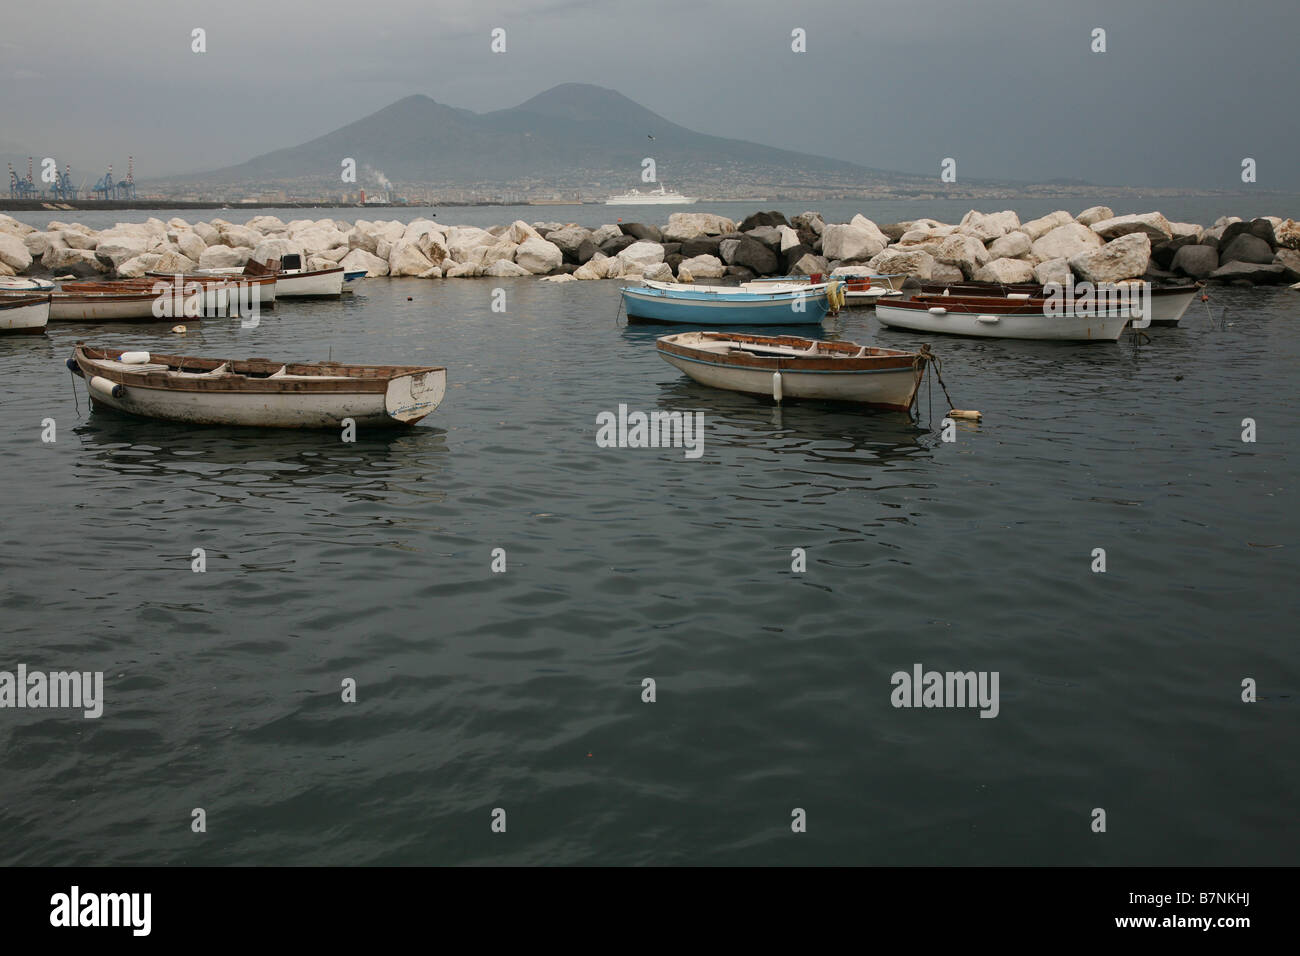 Mount Vesuvius and the bay of Naples with fisherman boats in Naples, Italy. Stock Photo